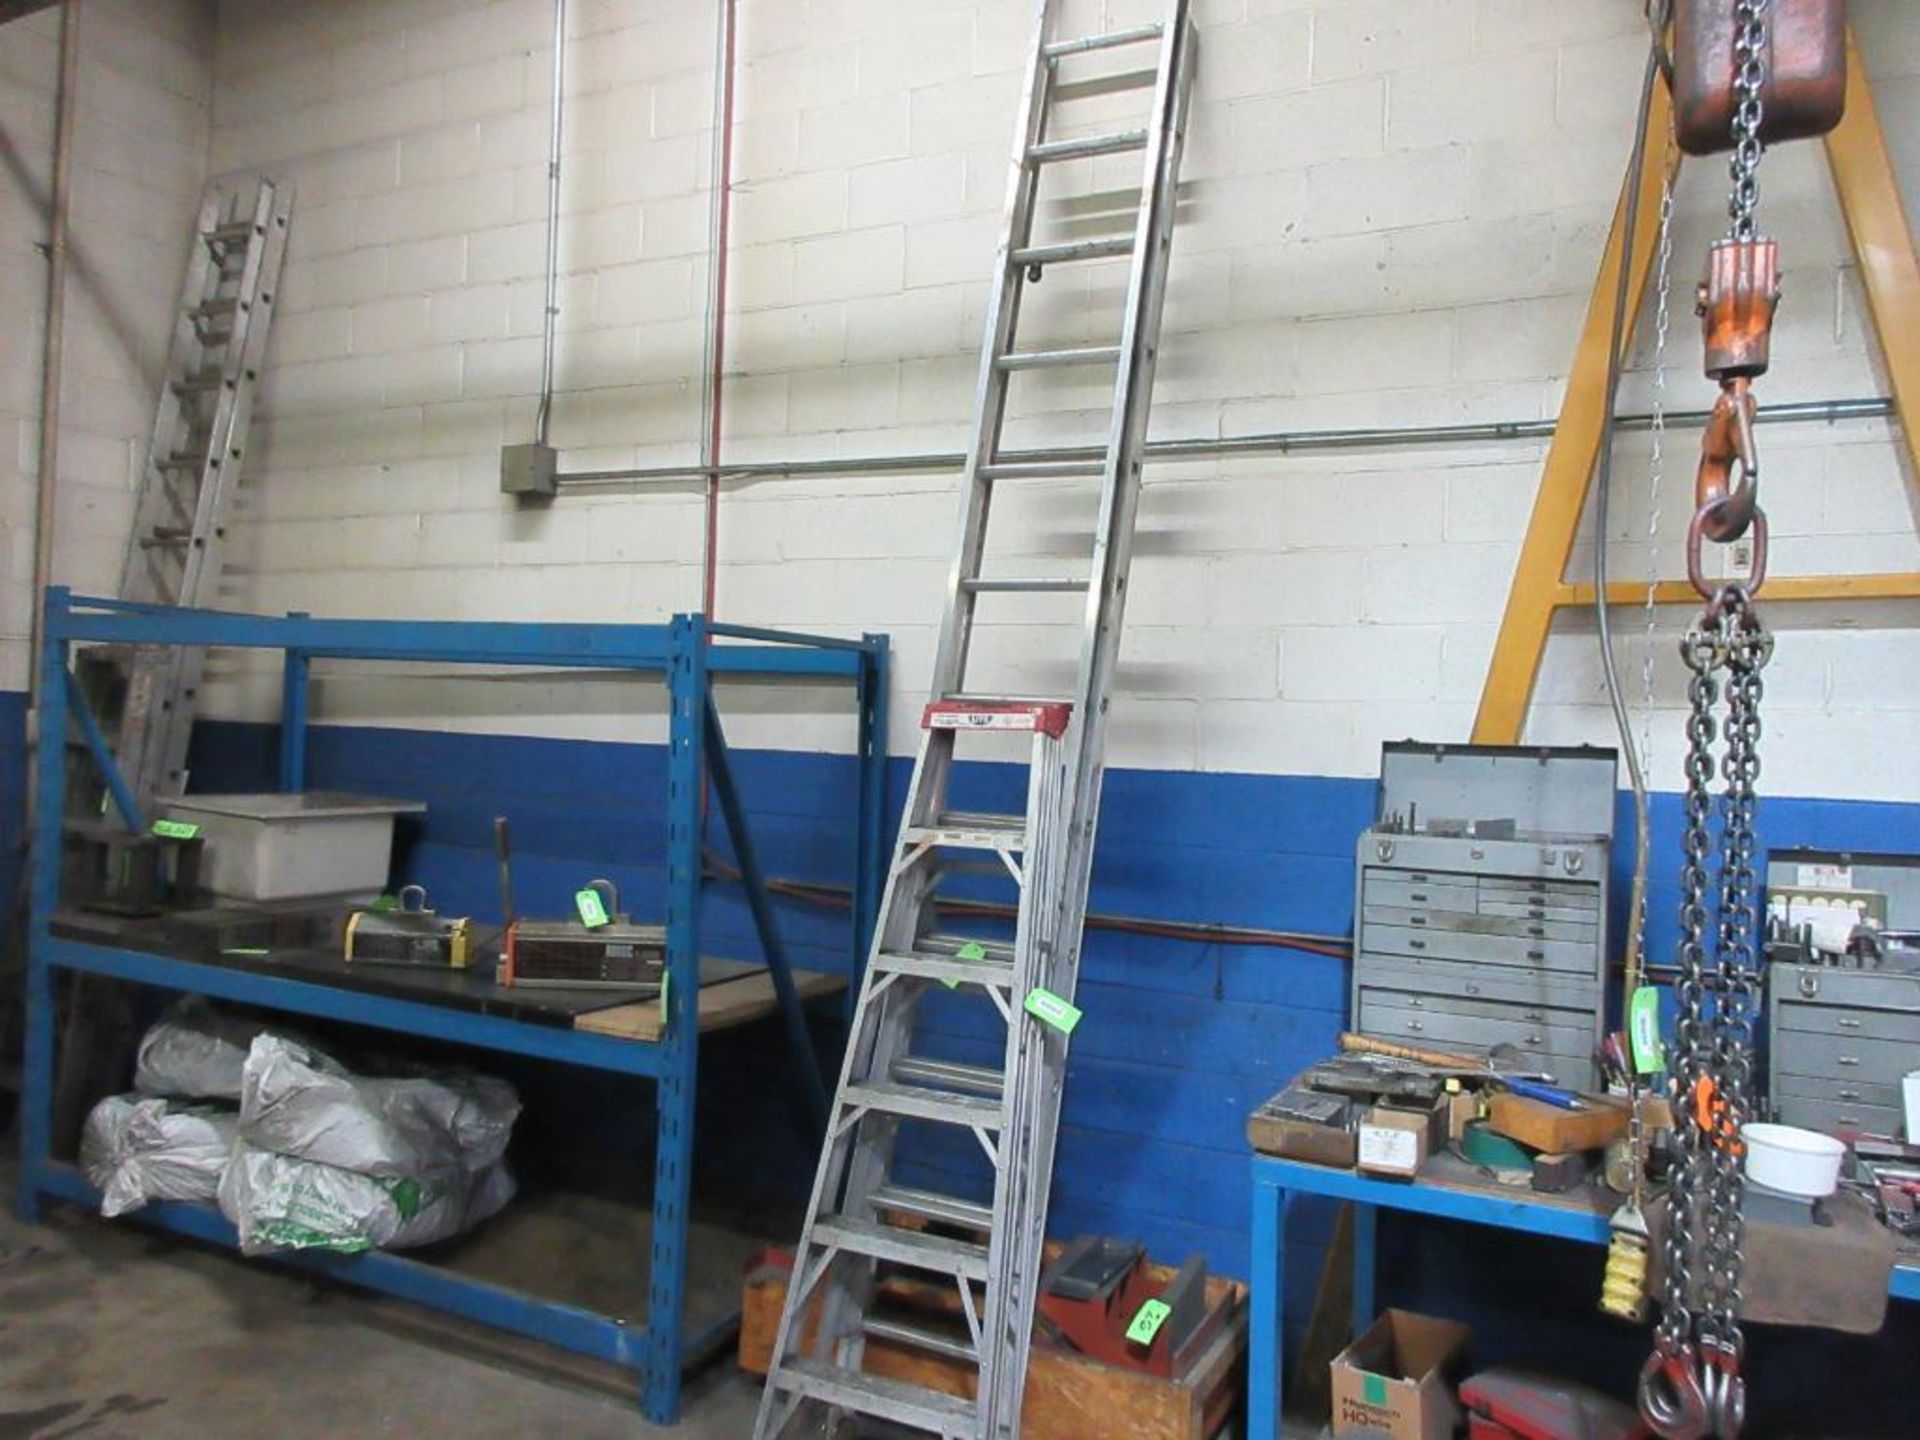 2 ALUMINUM LADDERS: 12 STEP AND 5 STEP